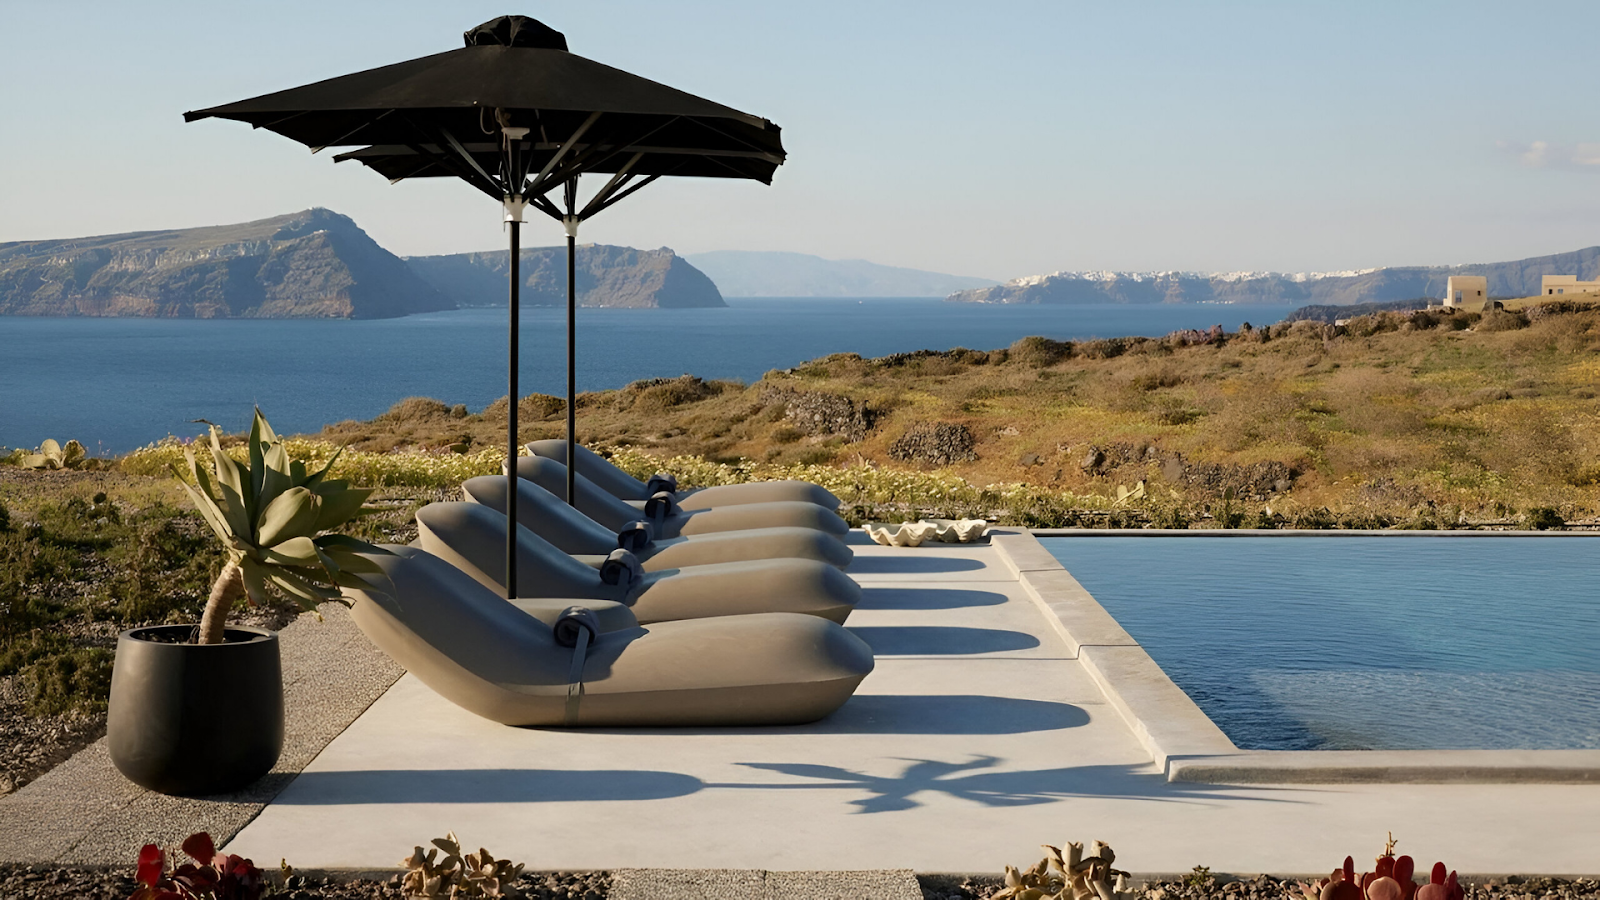 Sun loungers beside the pool of a vacation rental in Santorini.